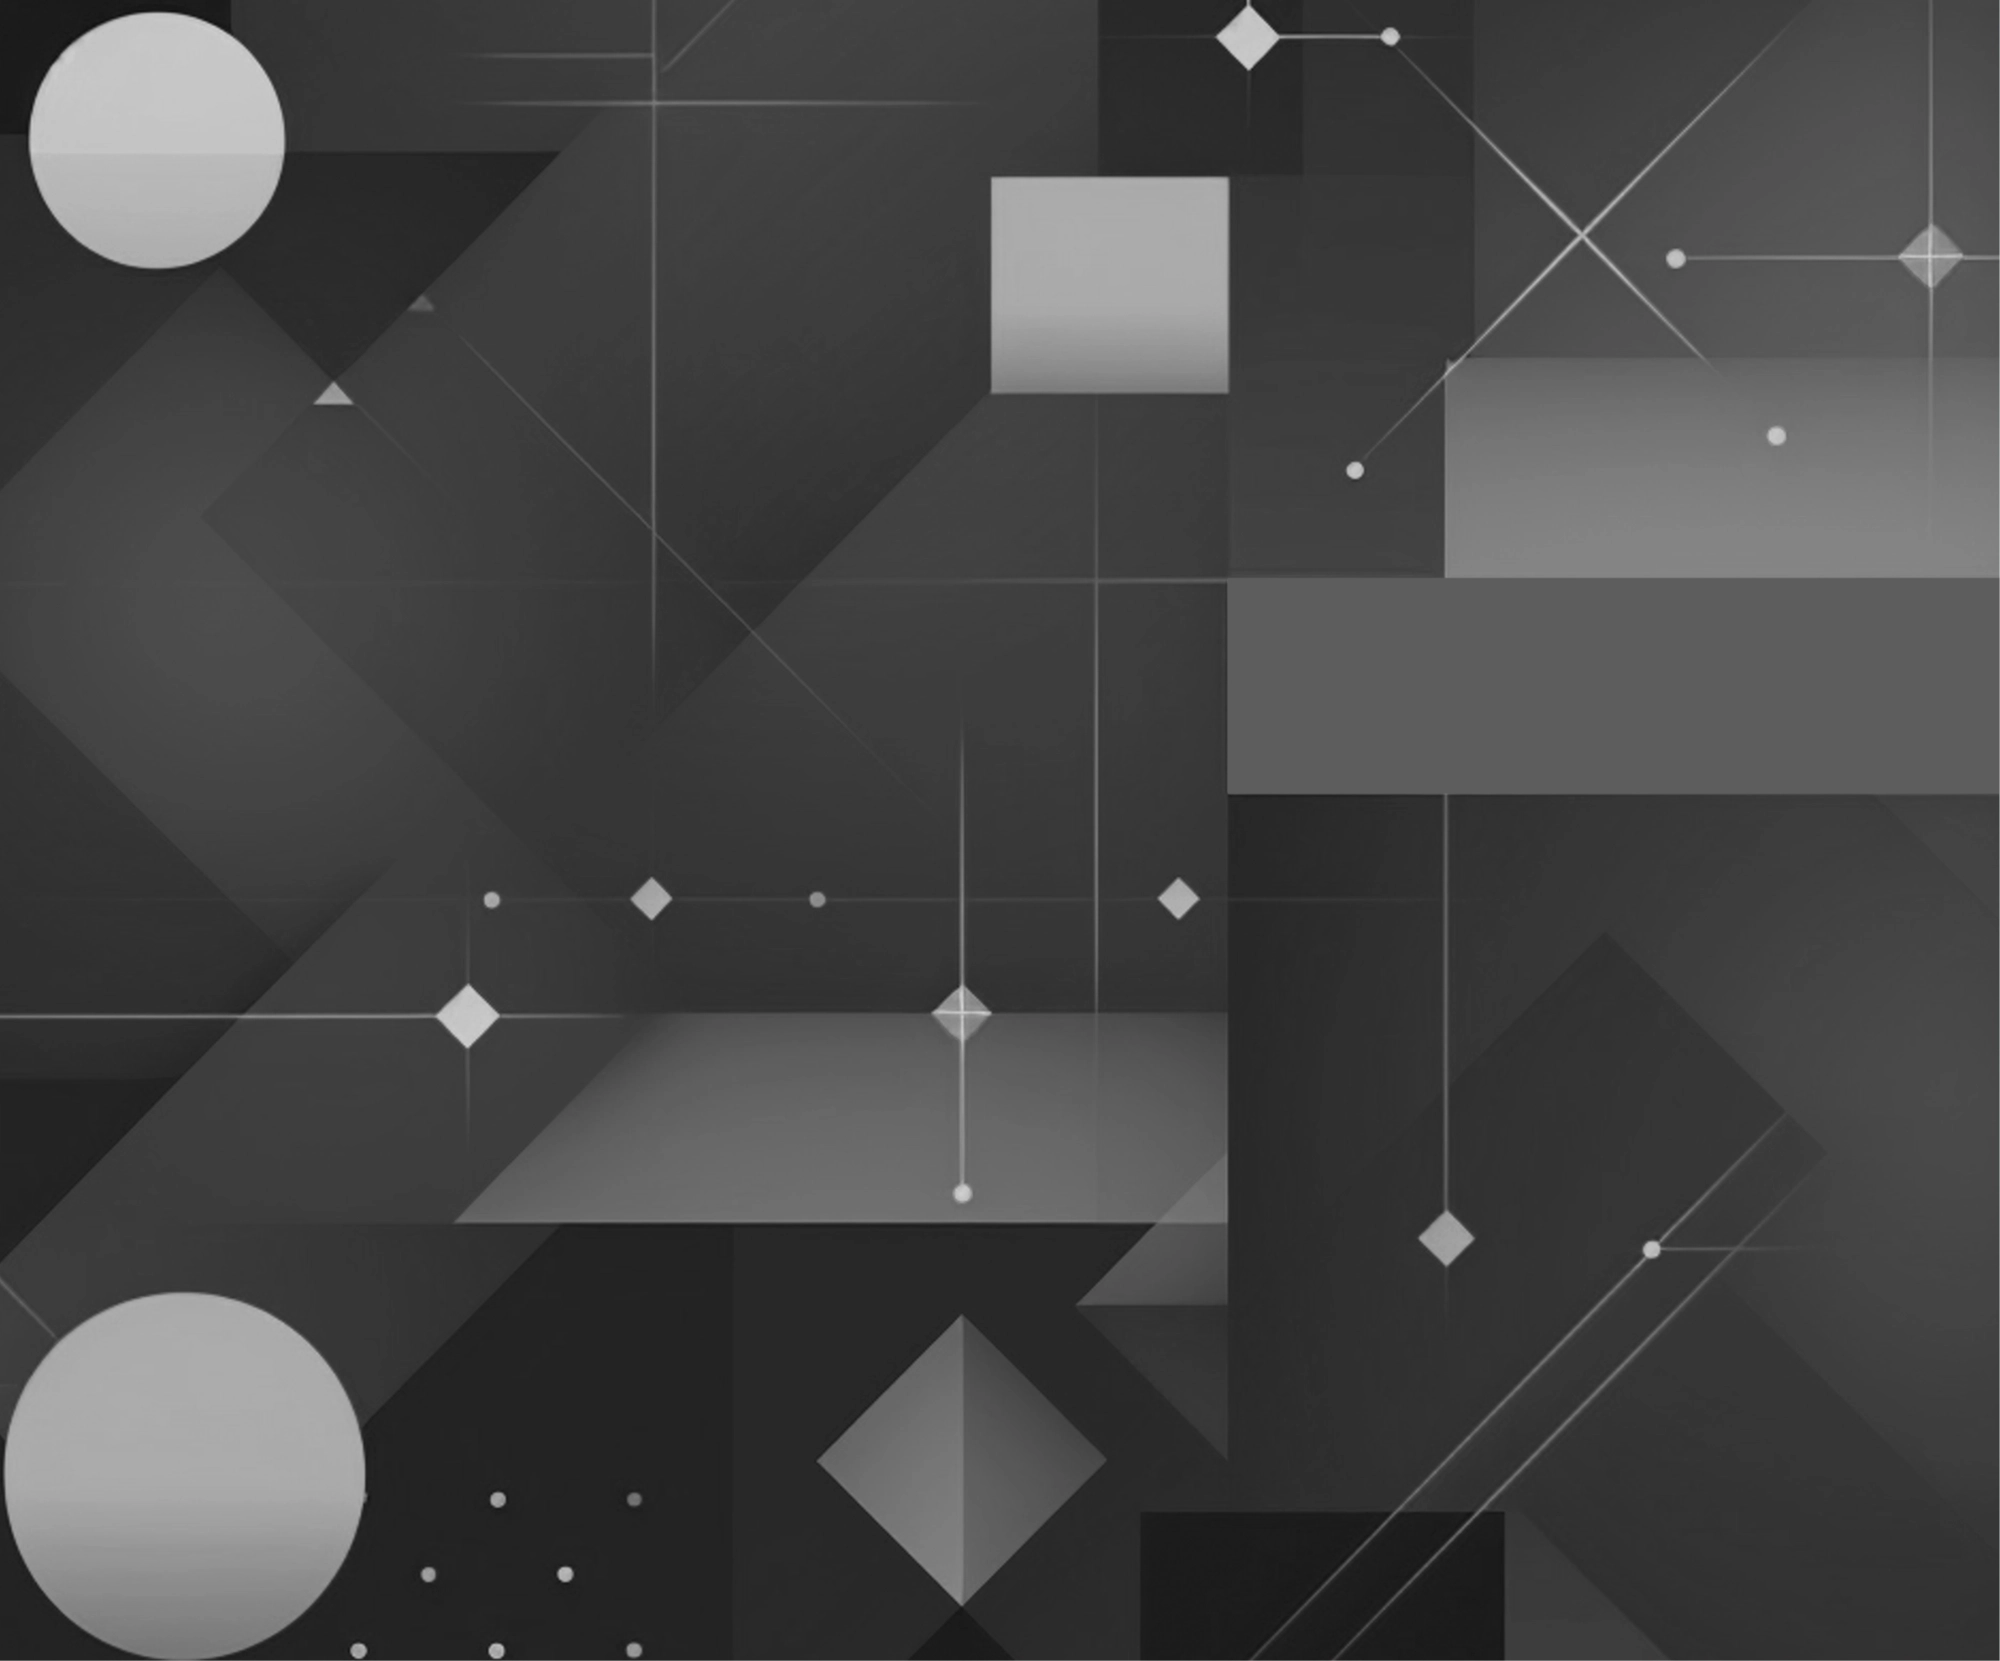 Background image of abstract shapes.